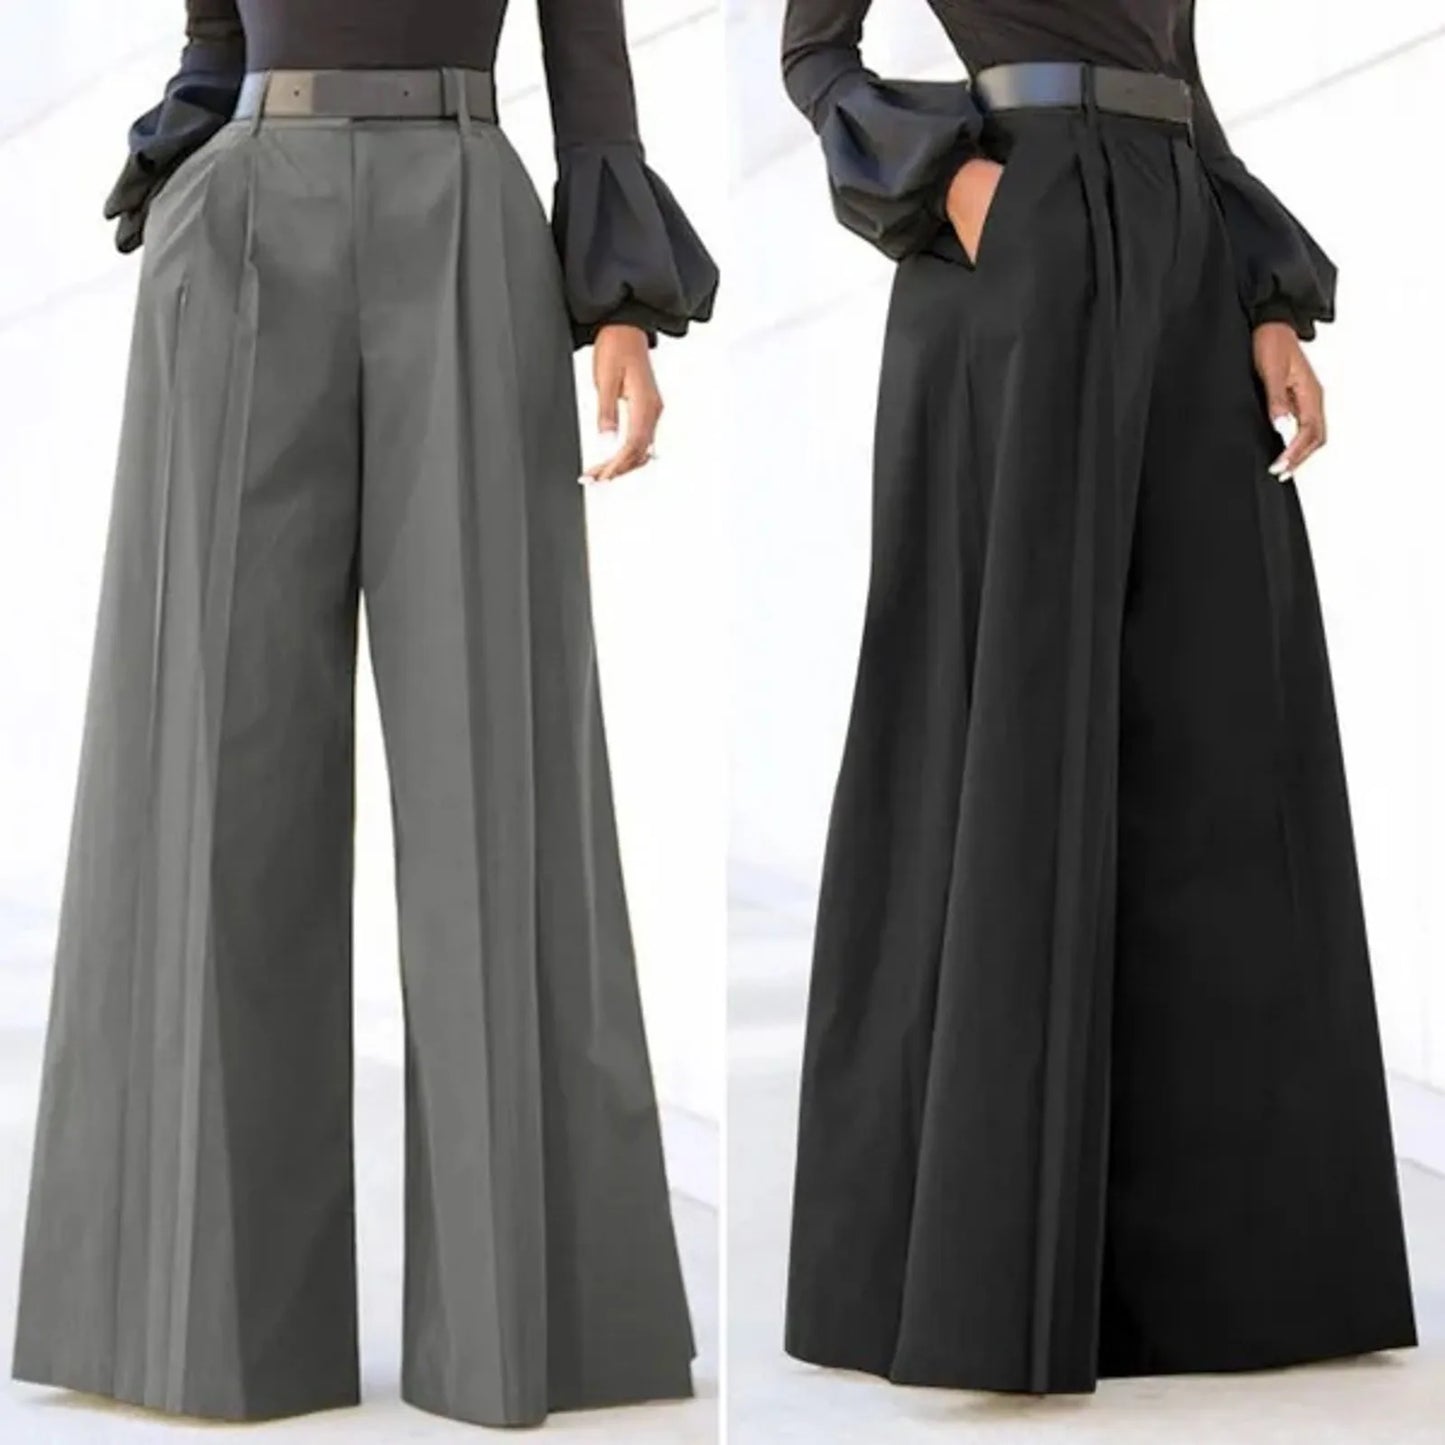 Fashion Elegant Party Pants For Women Palazzo Pants Summer Printed Cropped Cotton Linen Comfy Baggy Trousers With Pockets